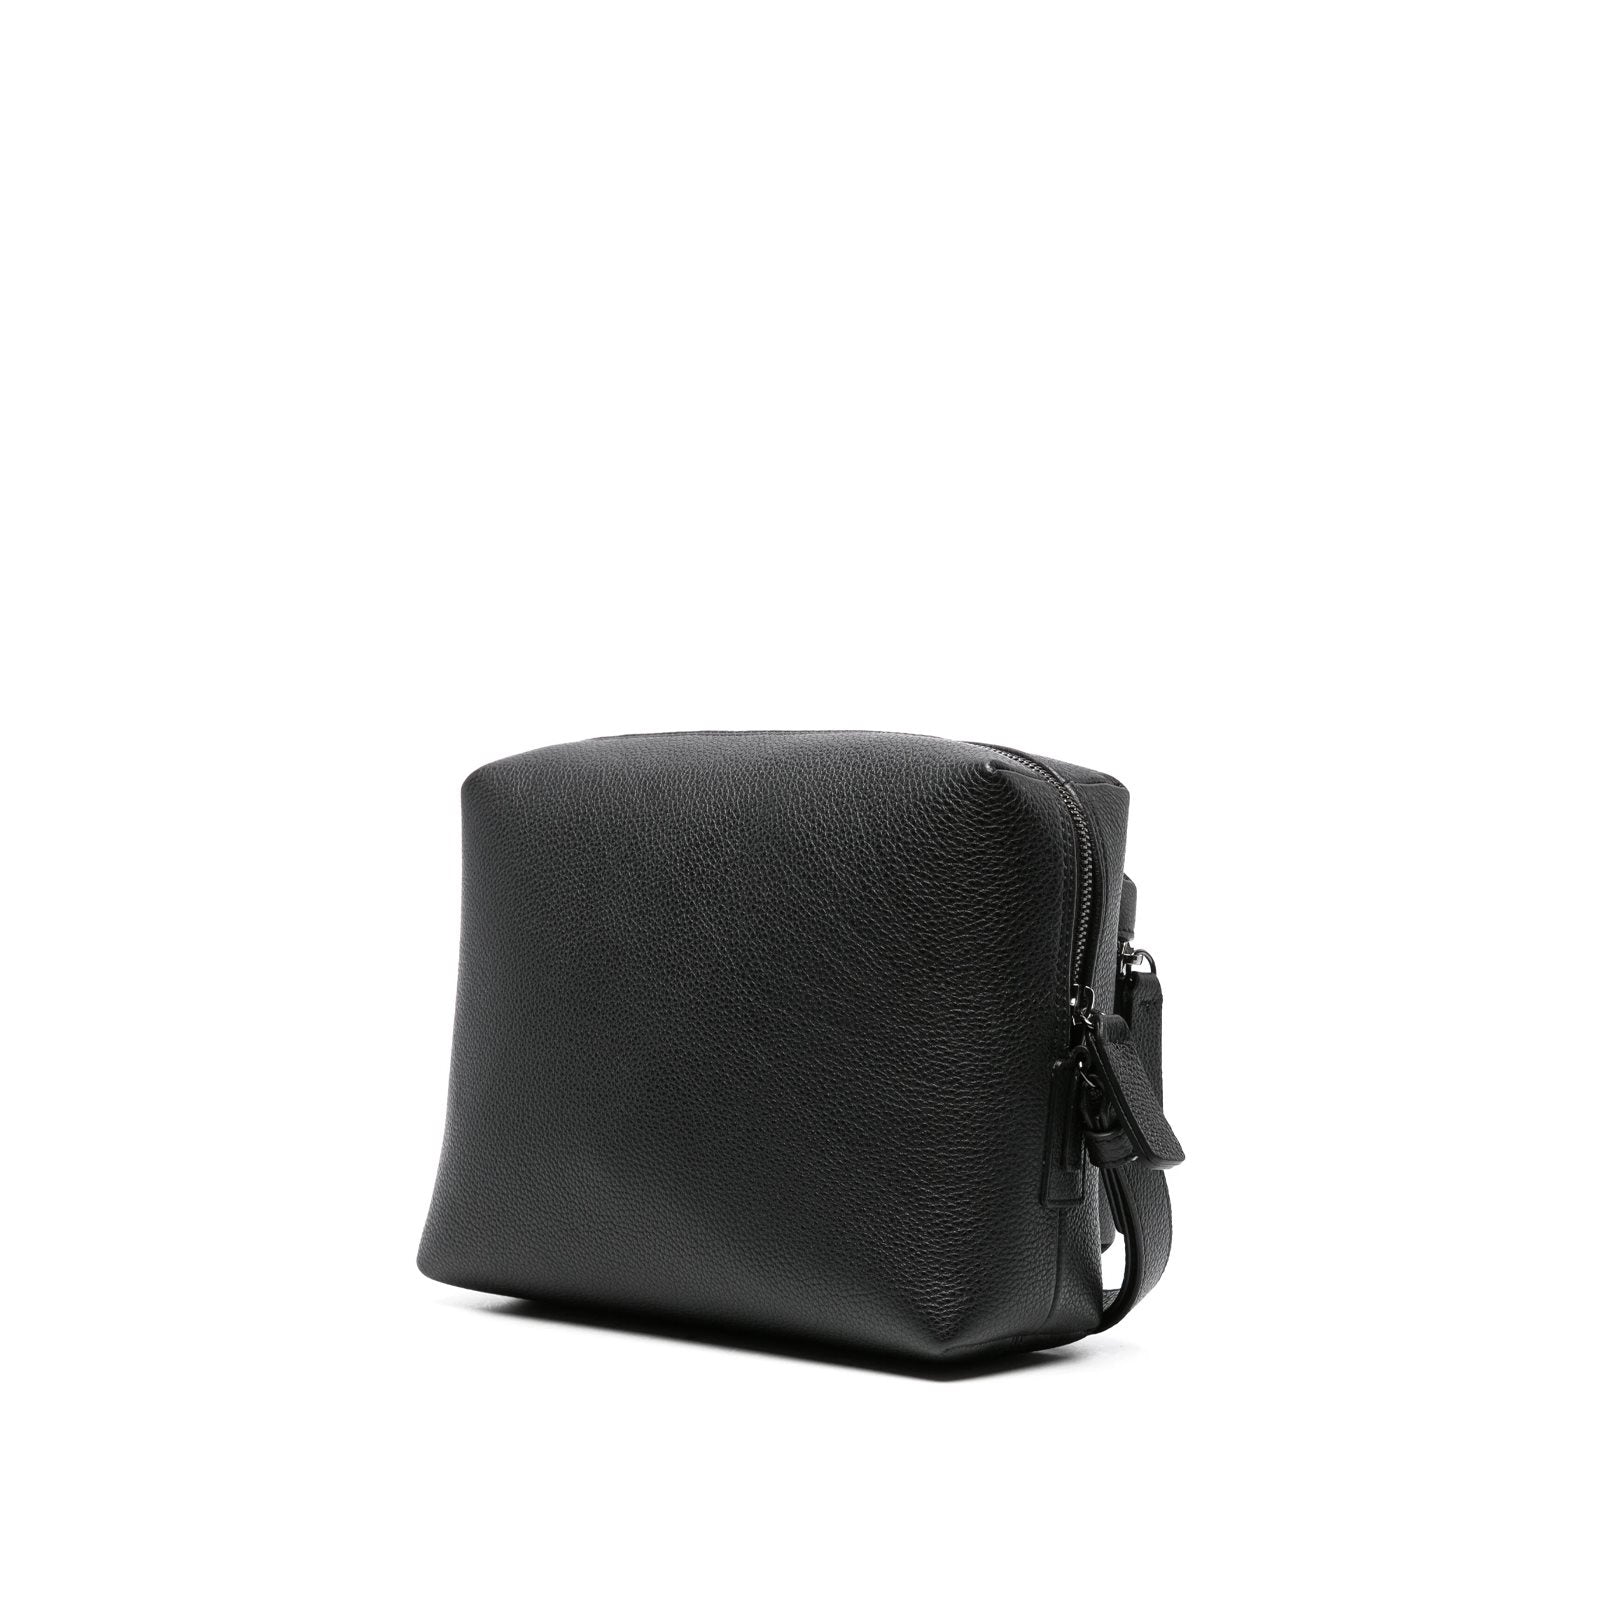 Zipped leather clutch bag